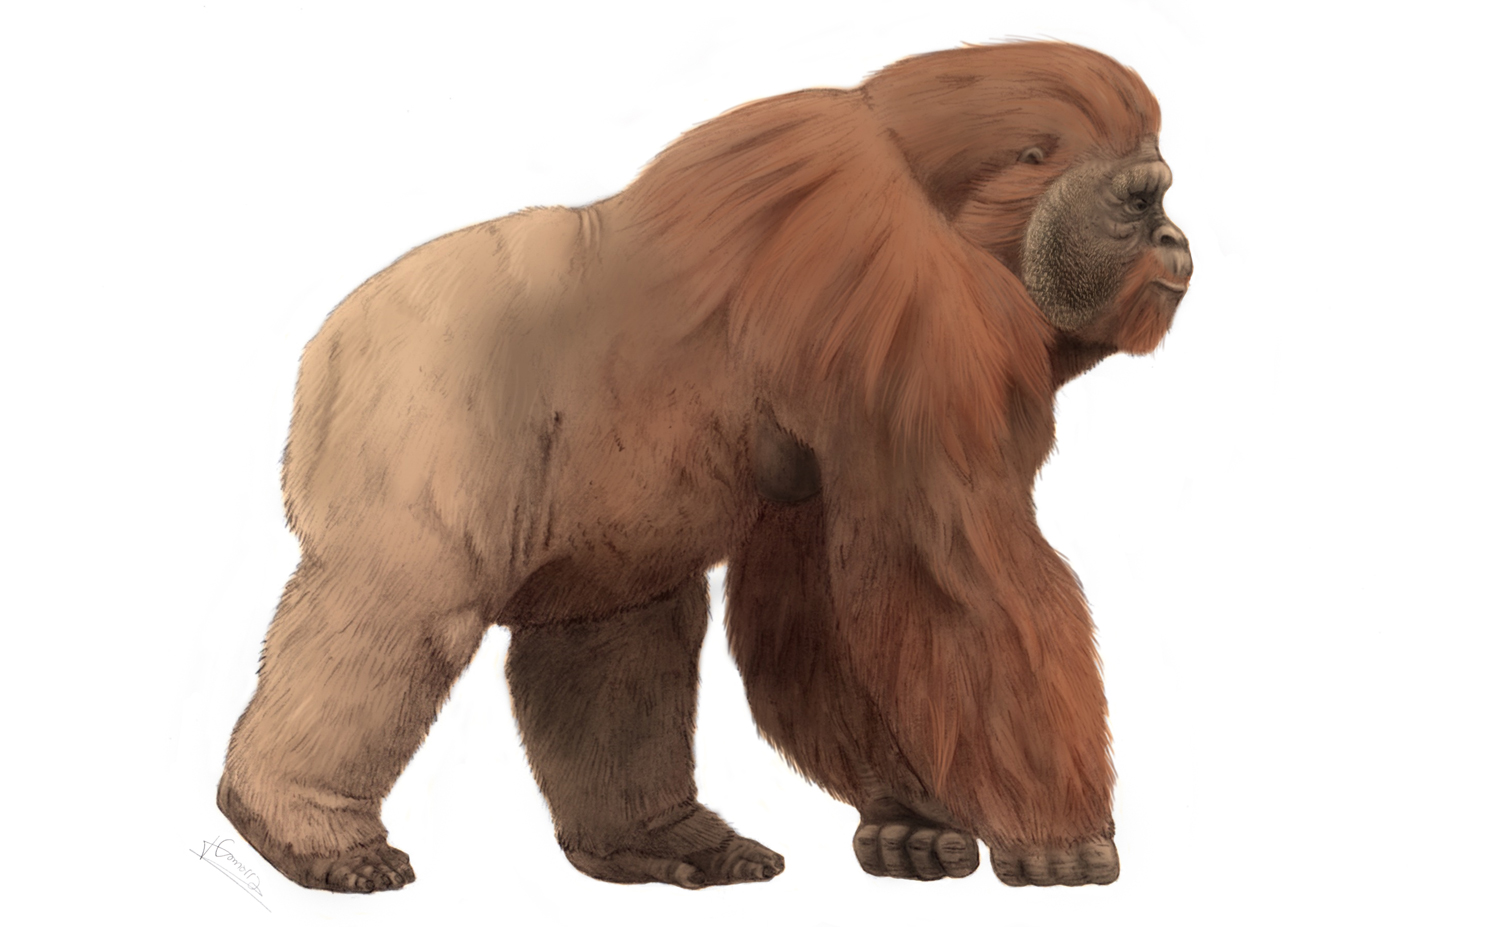 Side view of a large primate walking on all fours with a white background.